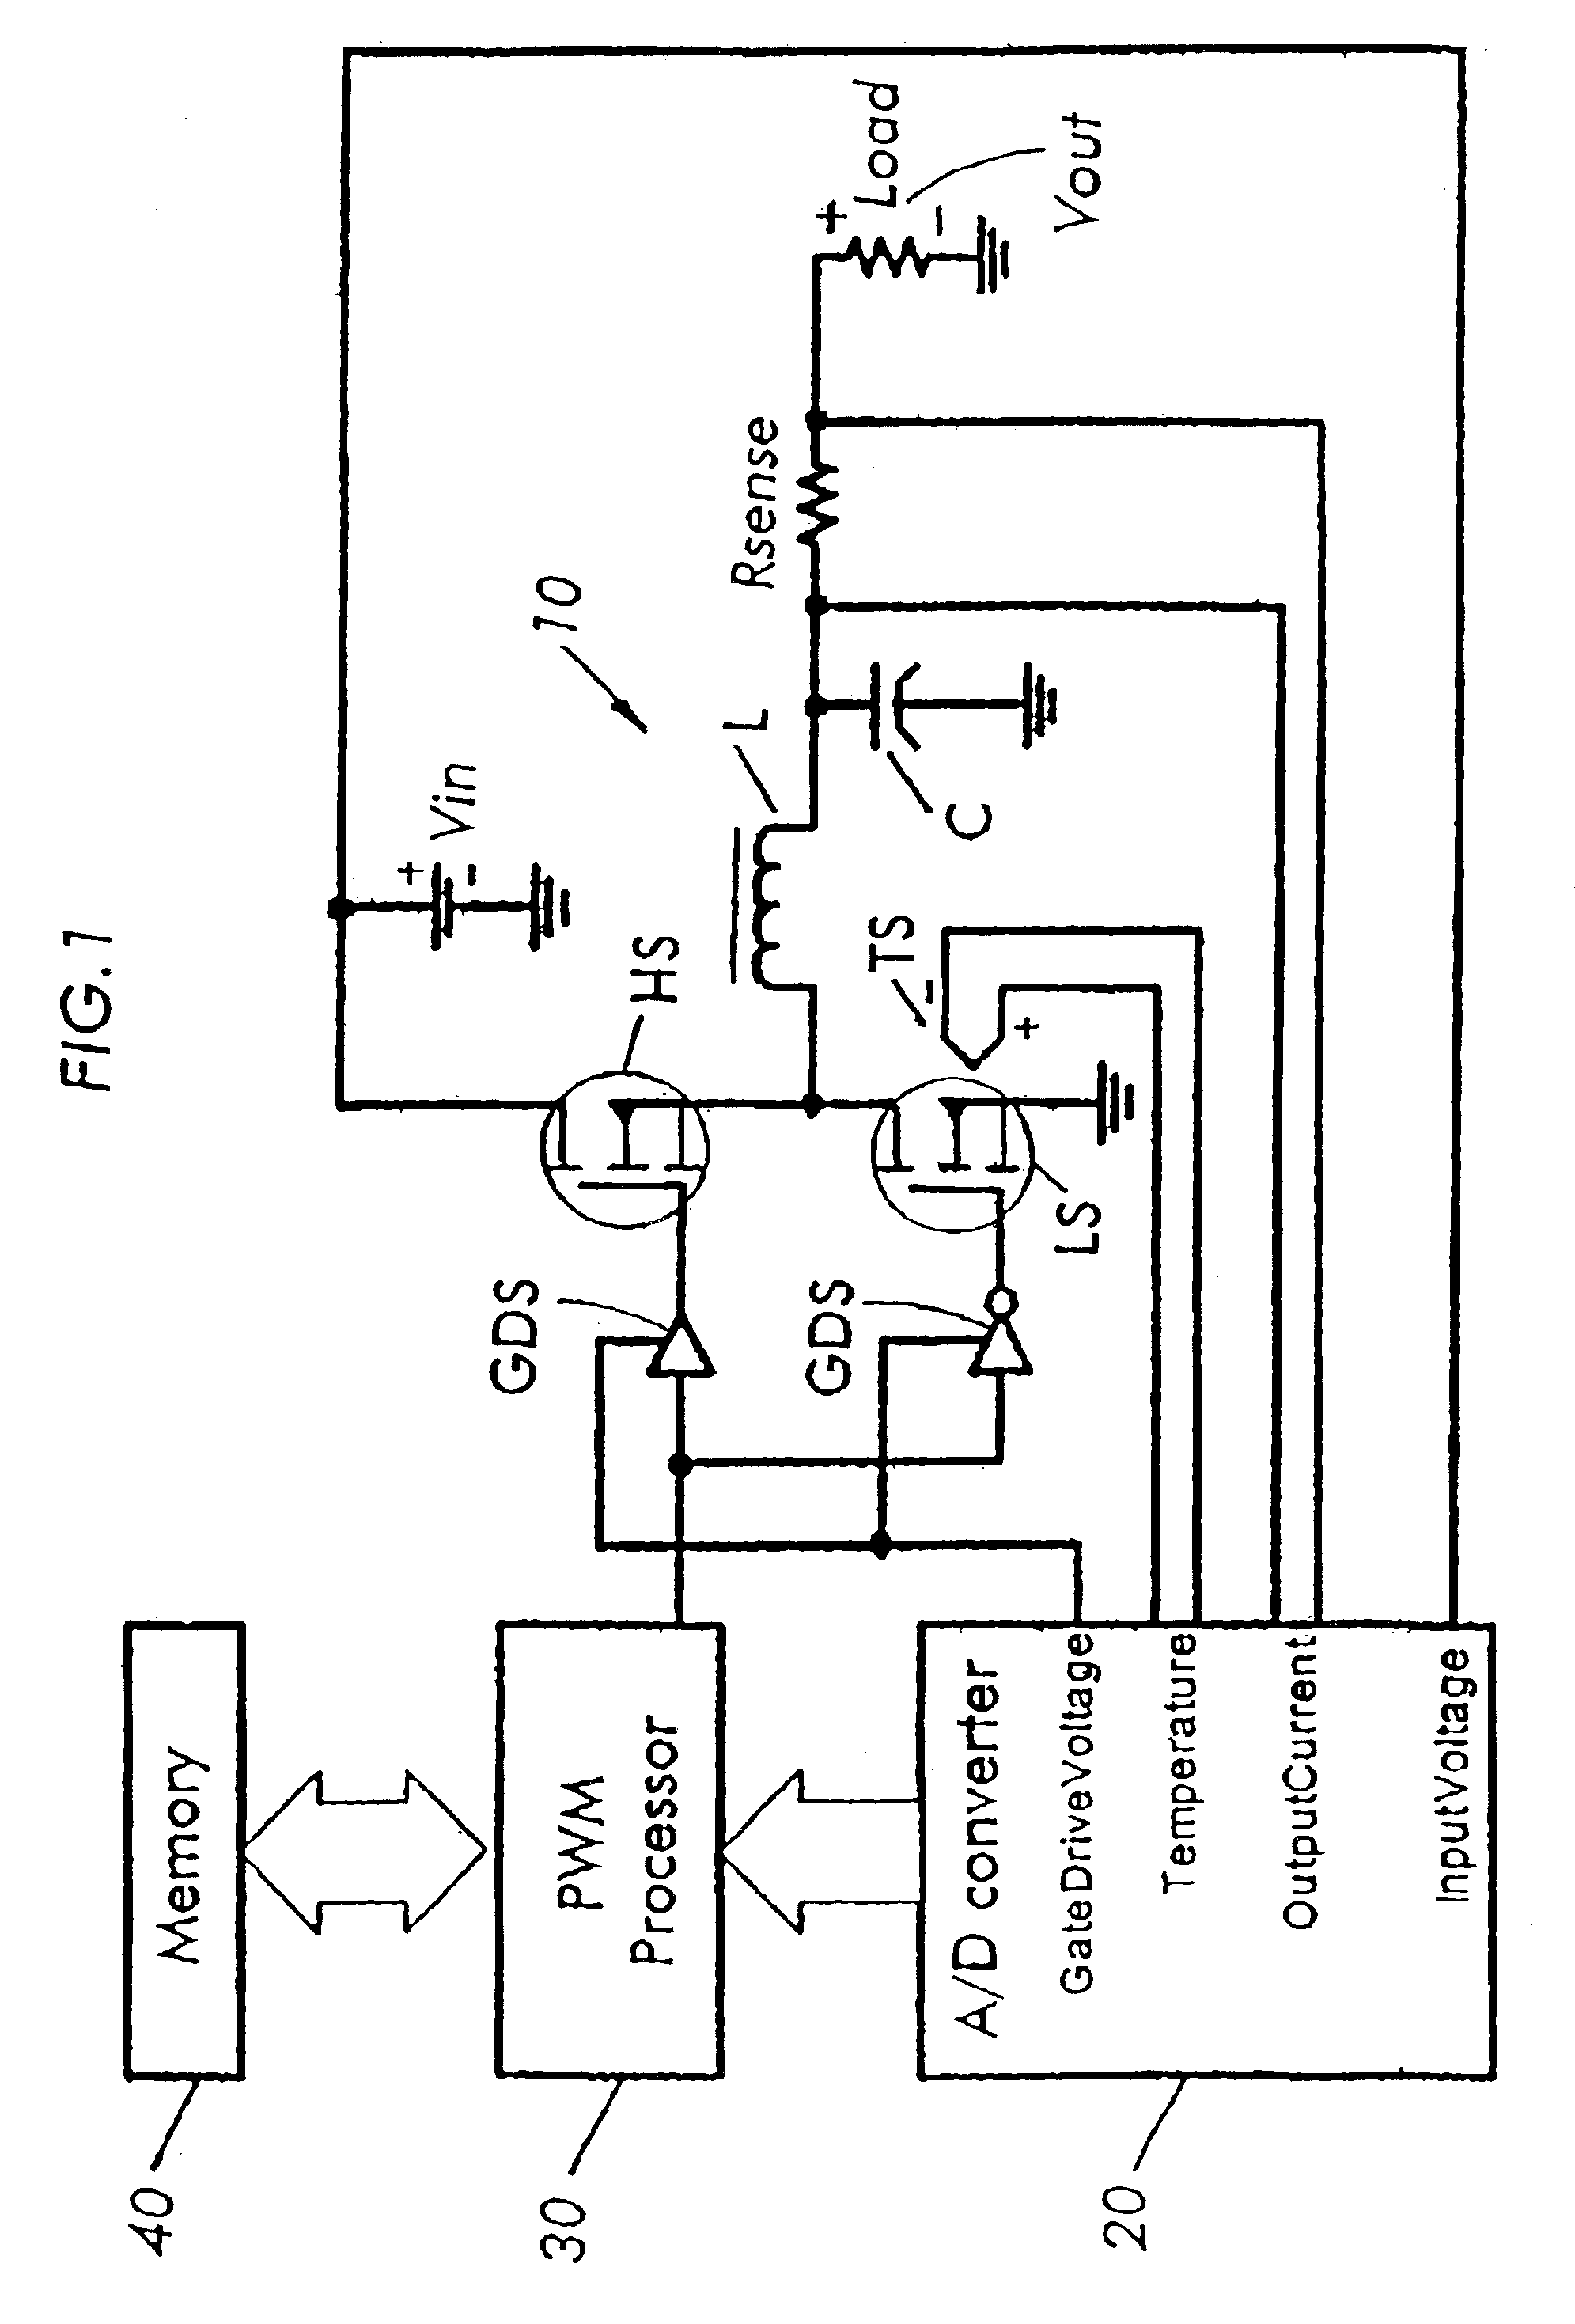 Total feed forward switching power supply control